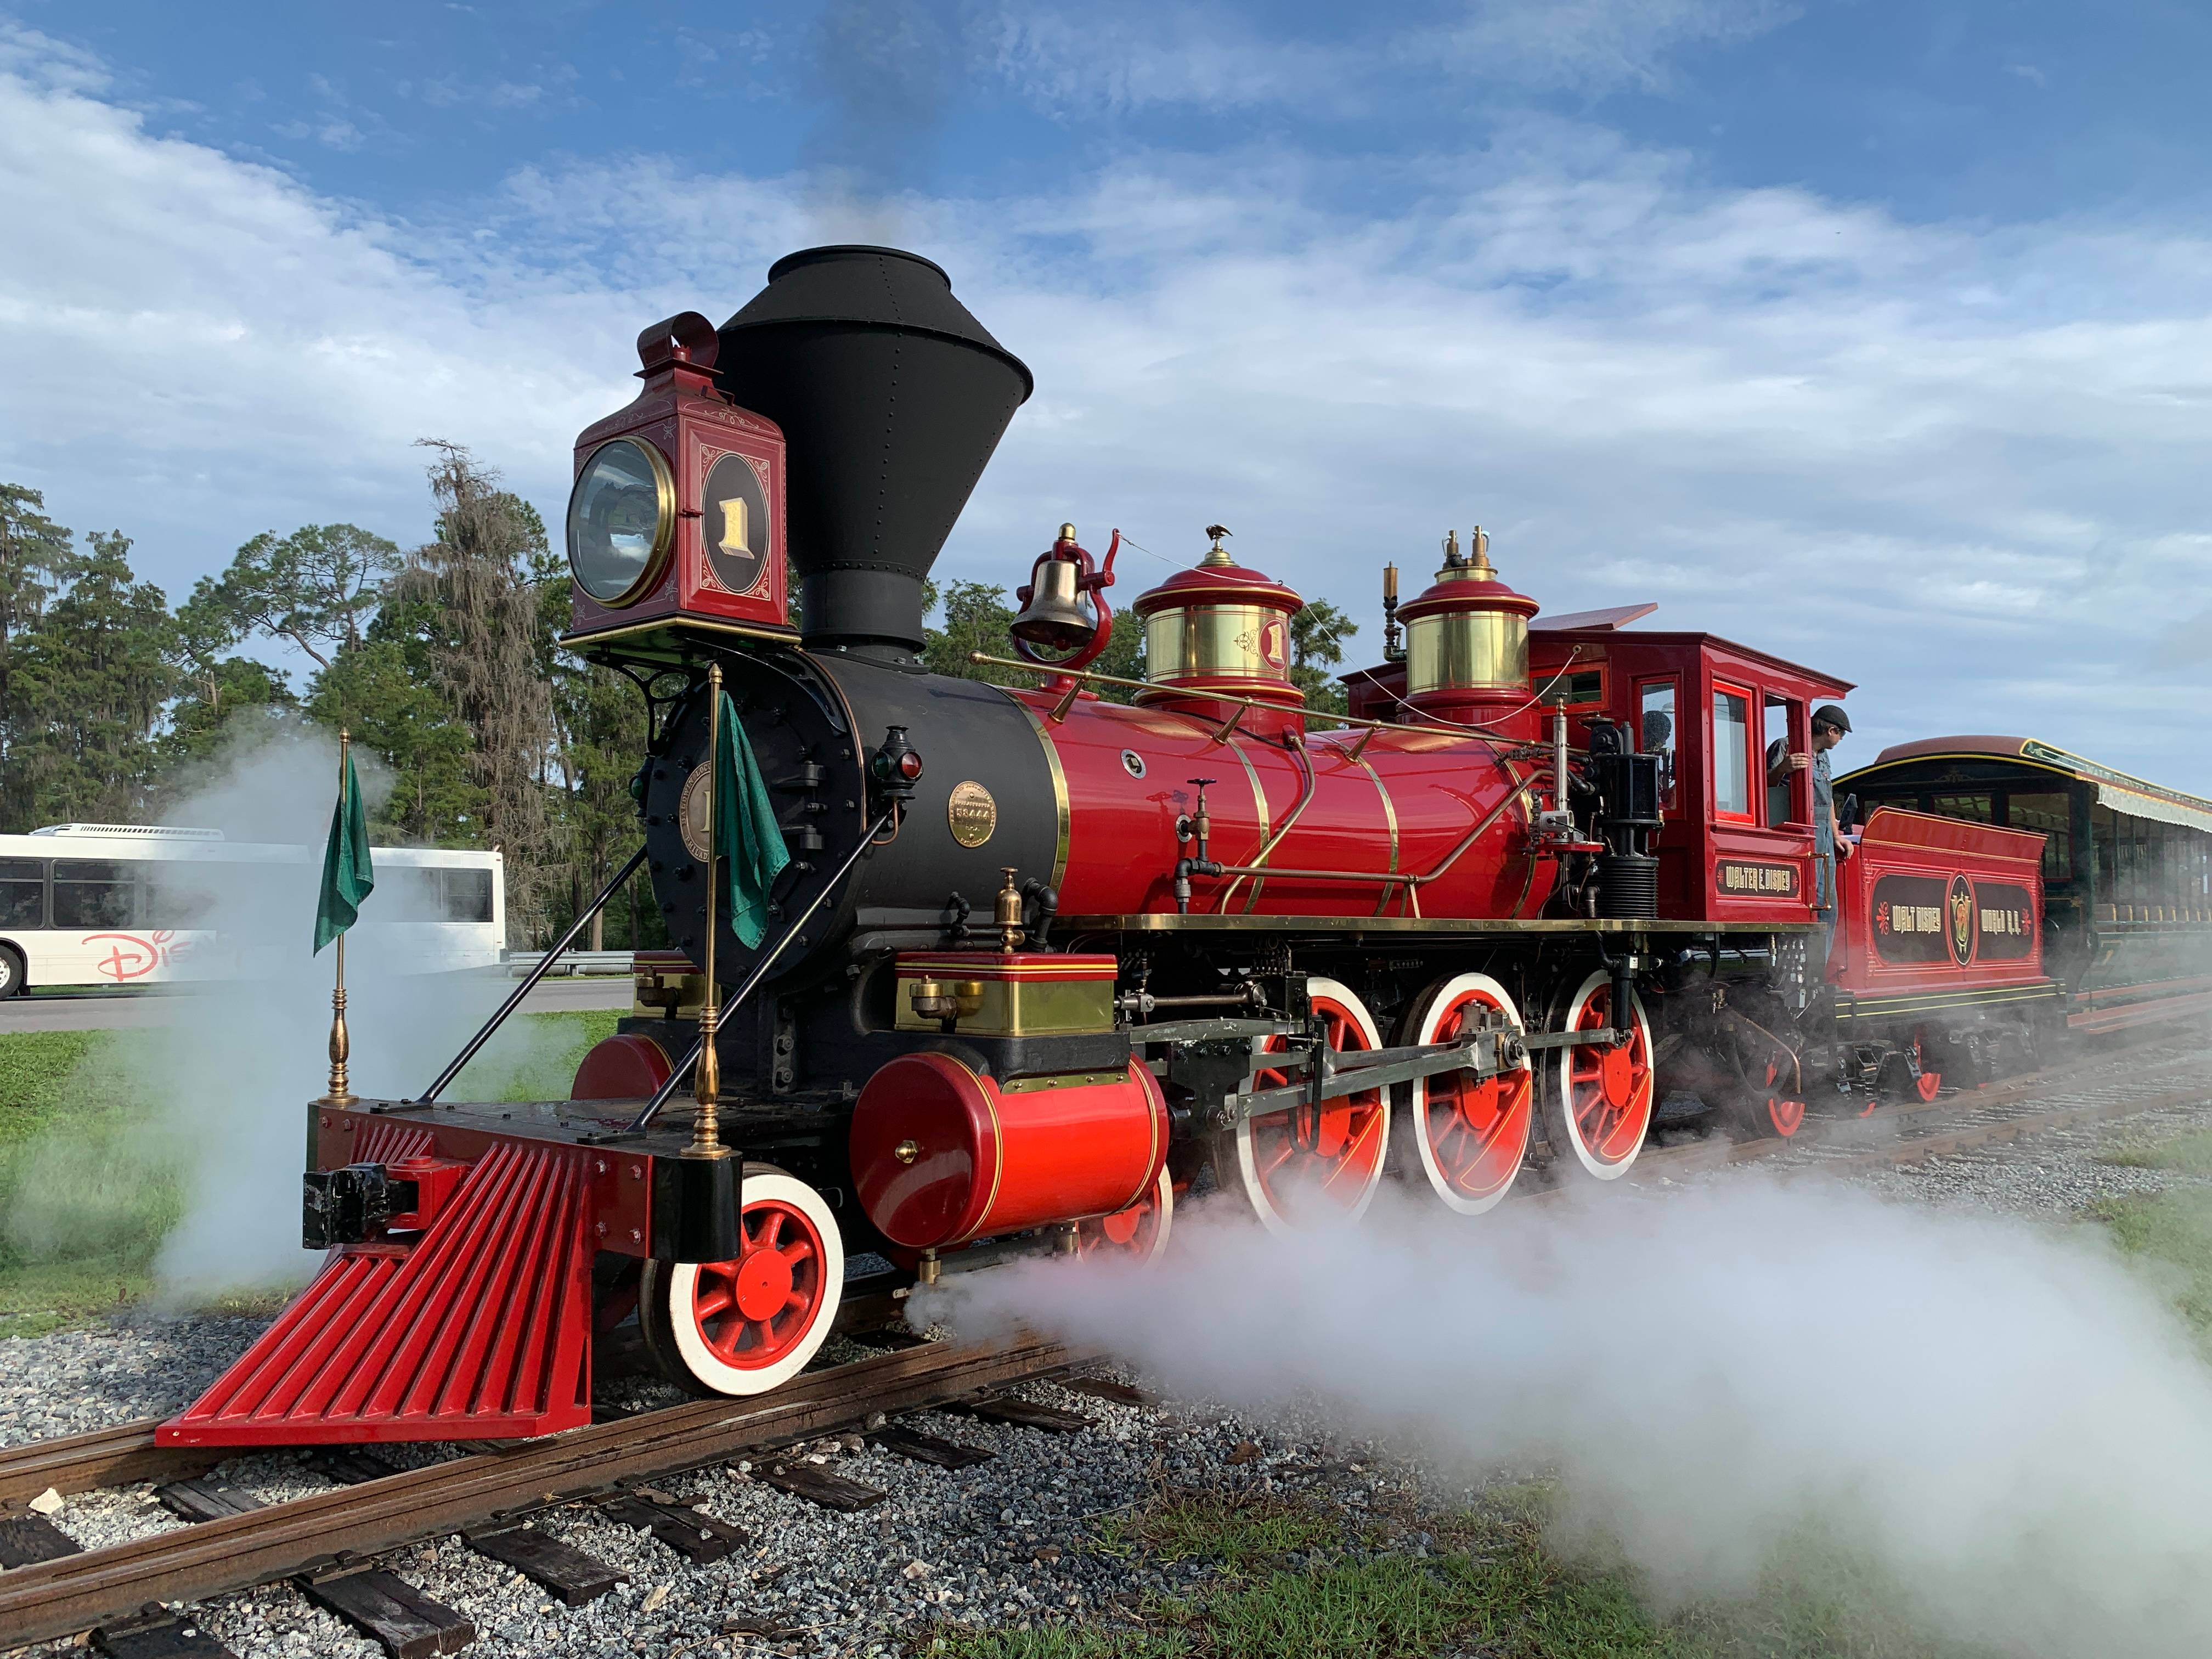 First look at the refurbished Walter E. Disney Engine 1 at the Walt Disney World Railroad